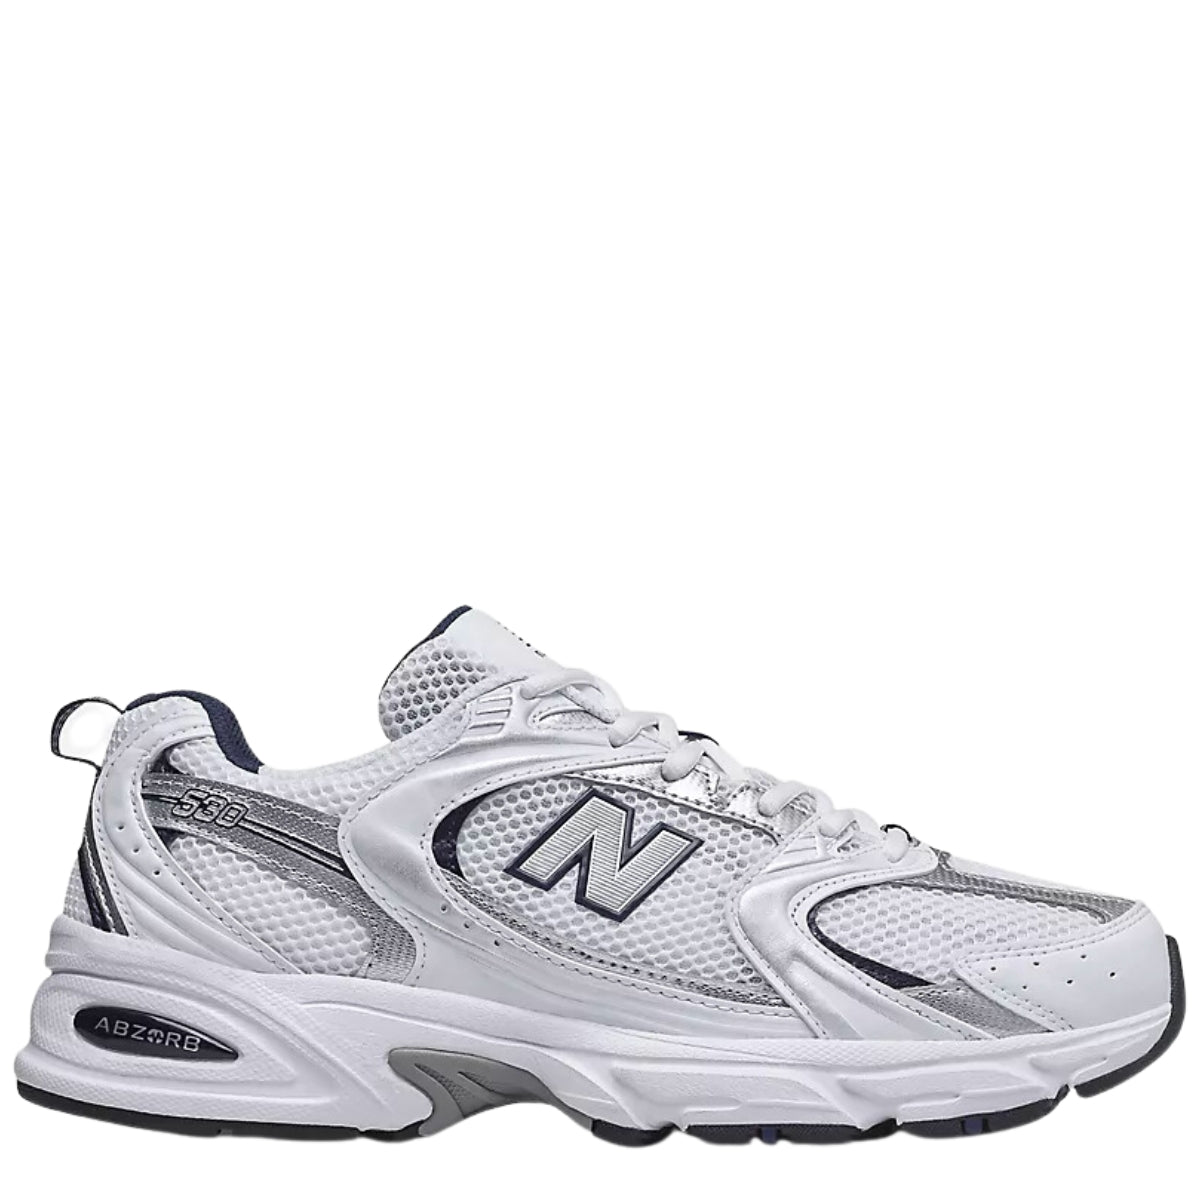 New Balance 530 in White with Natural Indigo